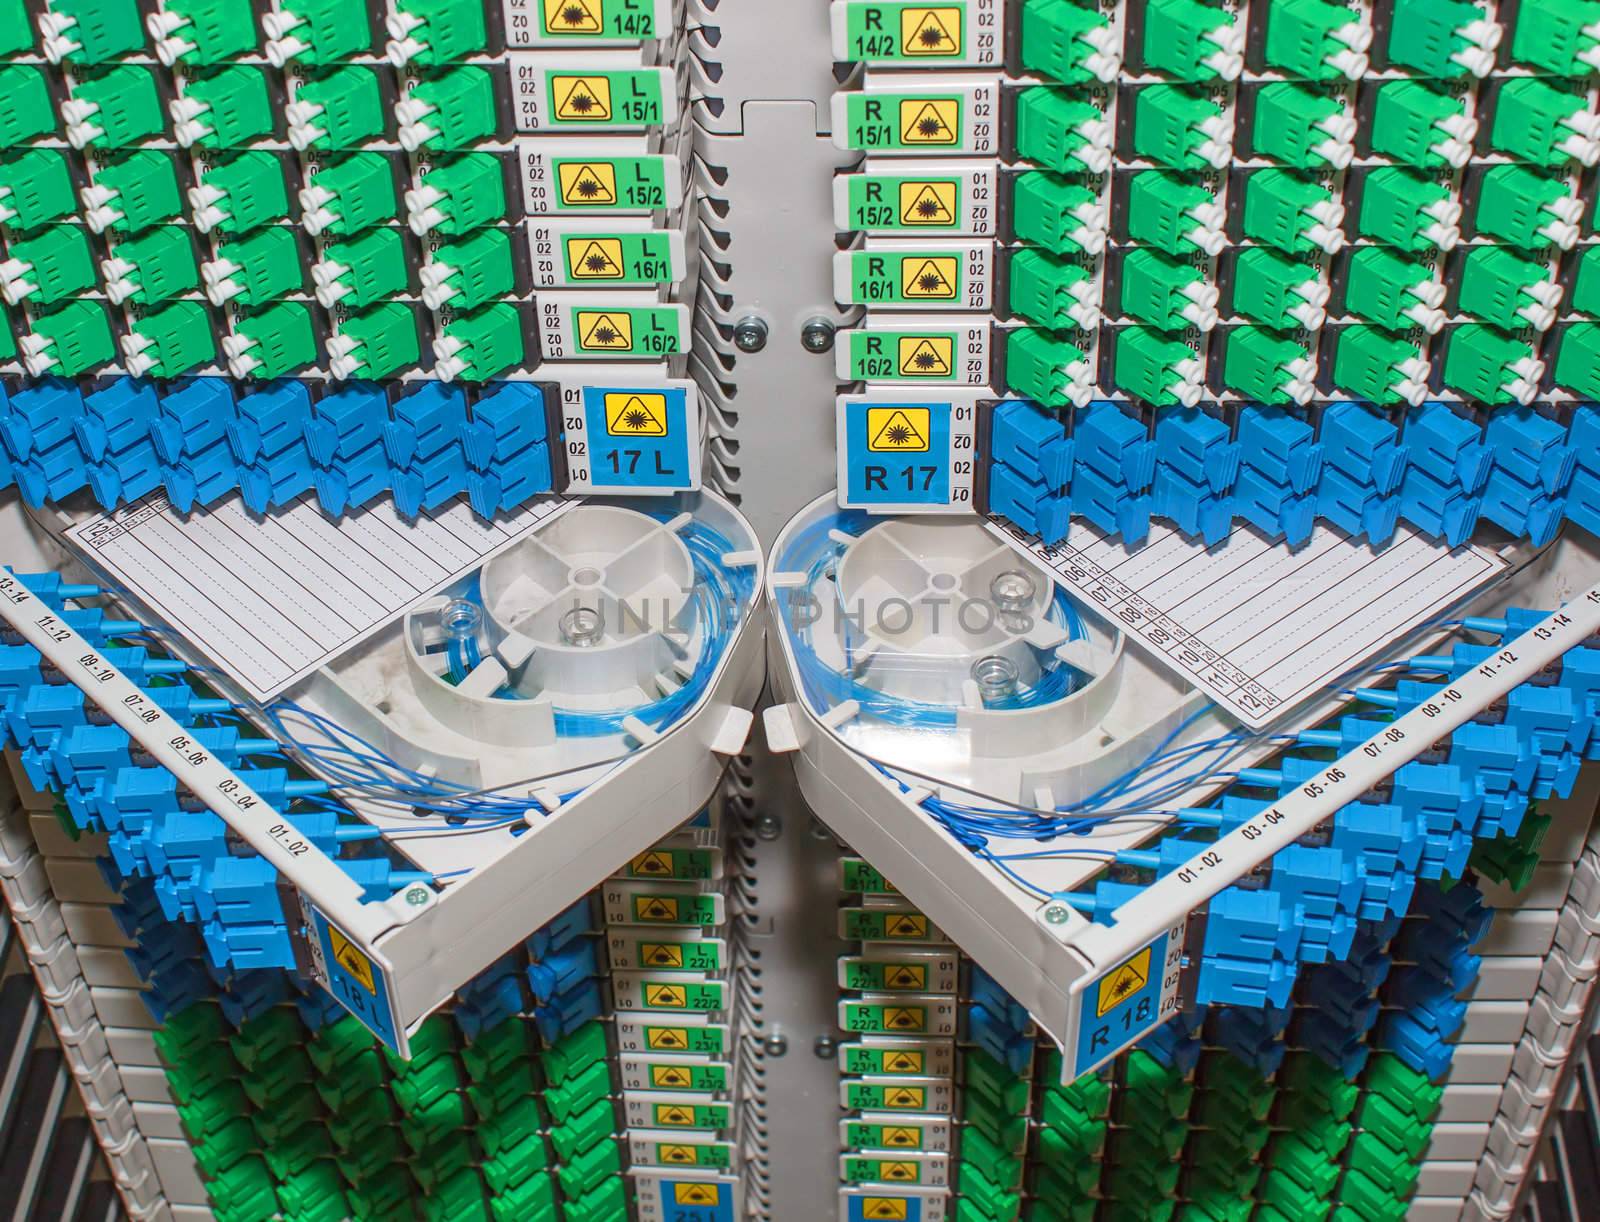 fiber optic rack with high density of blue and green SC connectors by artush